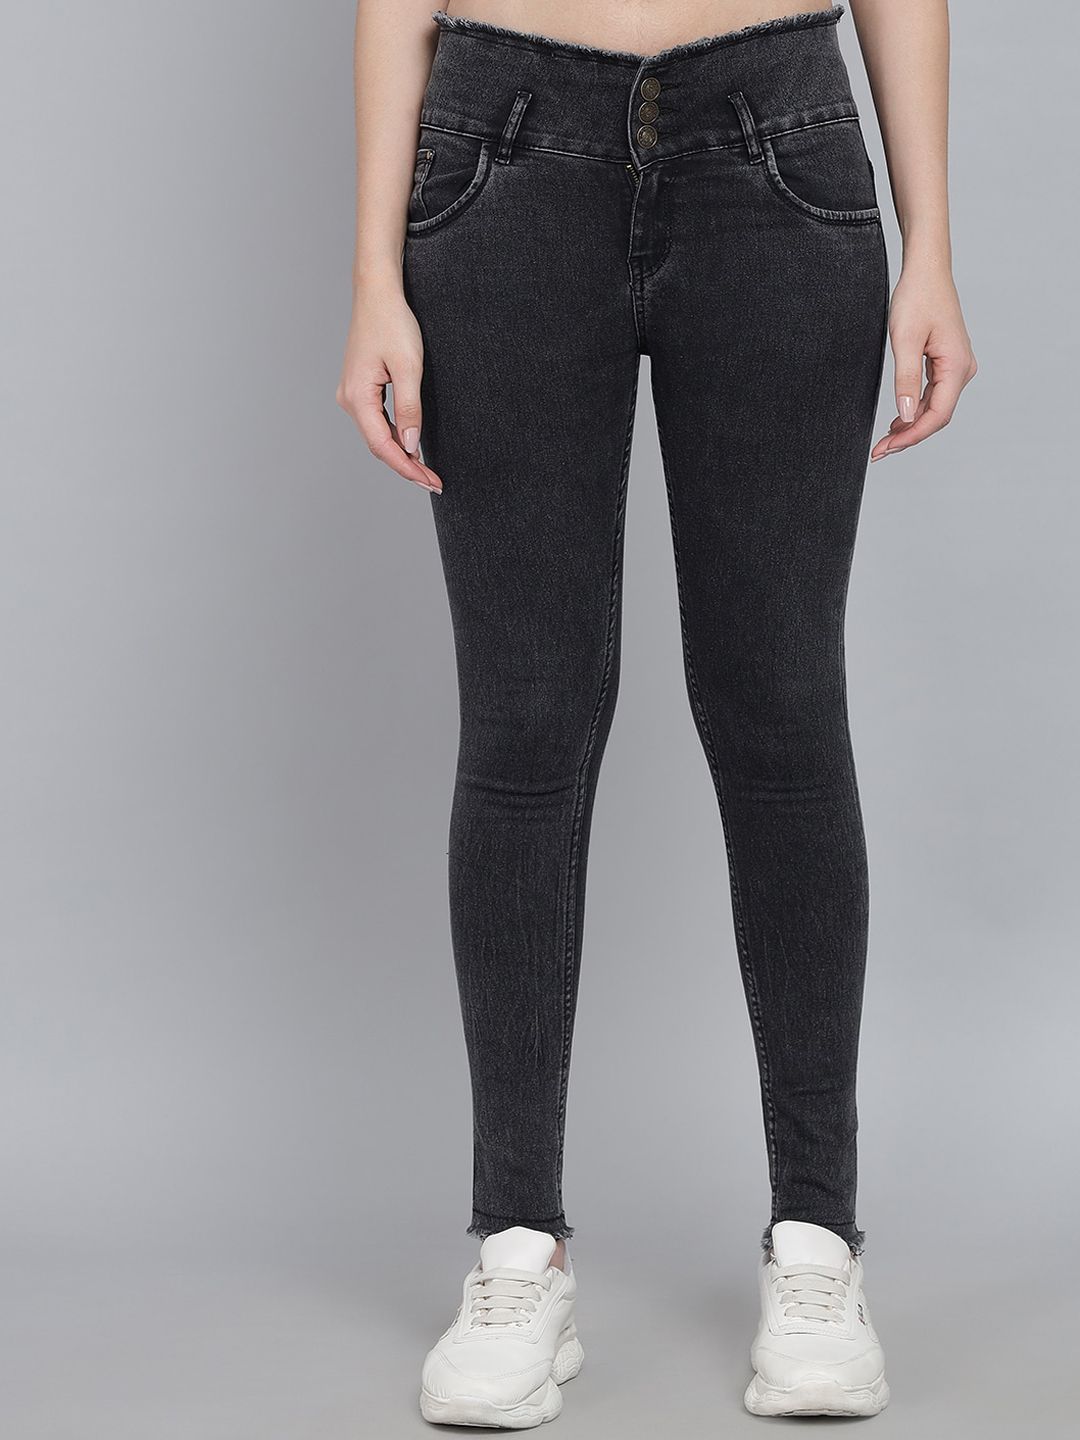 Q-rious Women Black Slim Fit High-Rise Stretchable Jeans Price in India